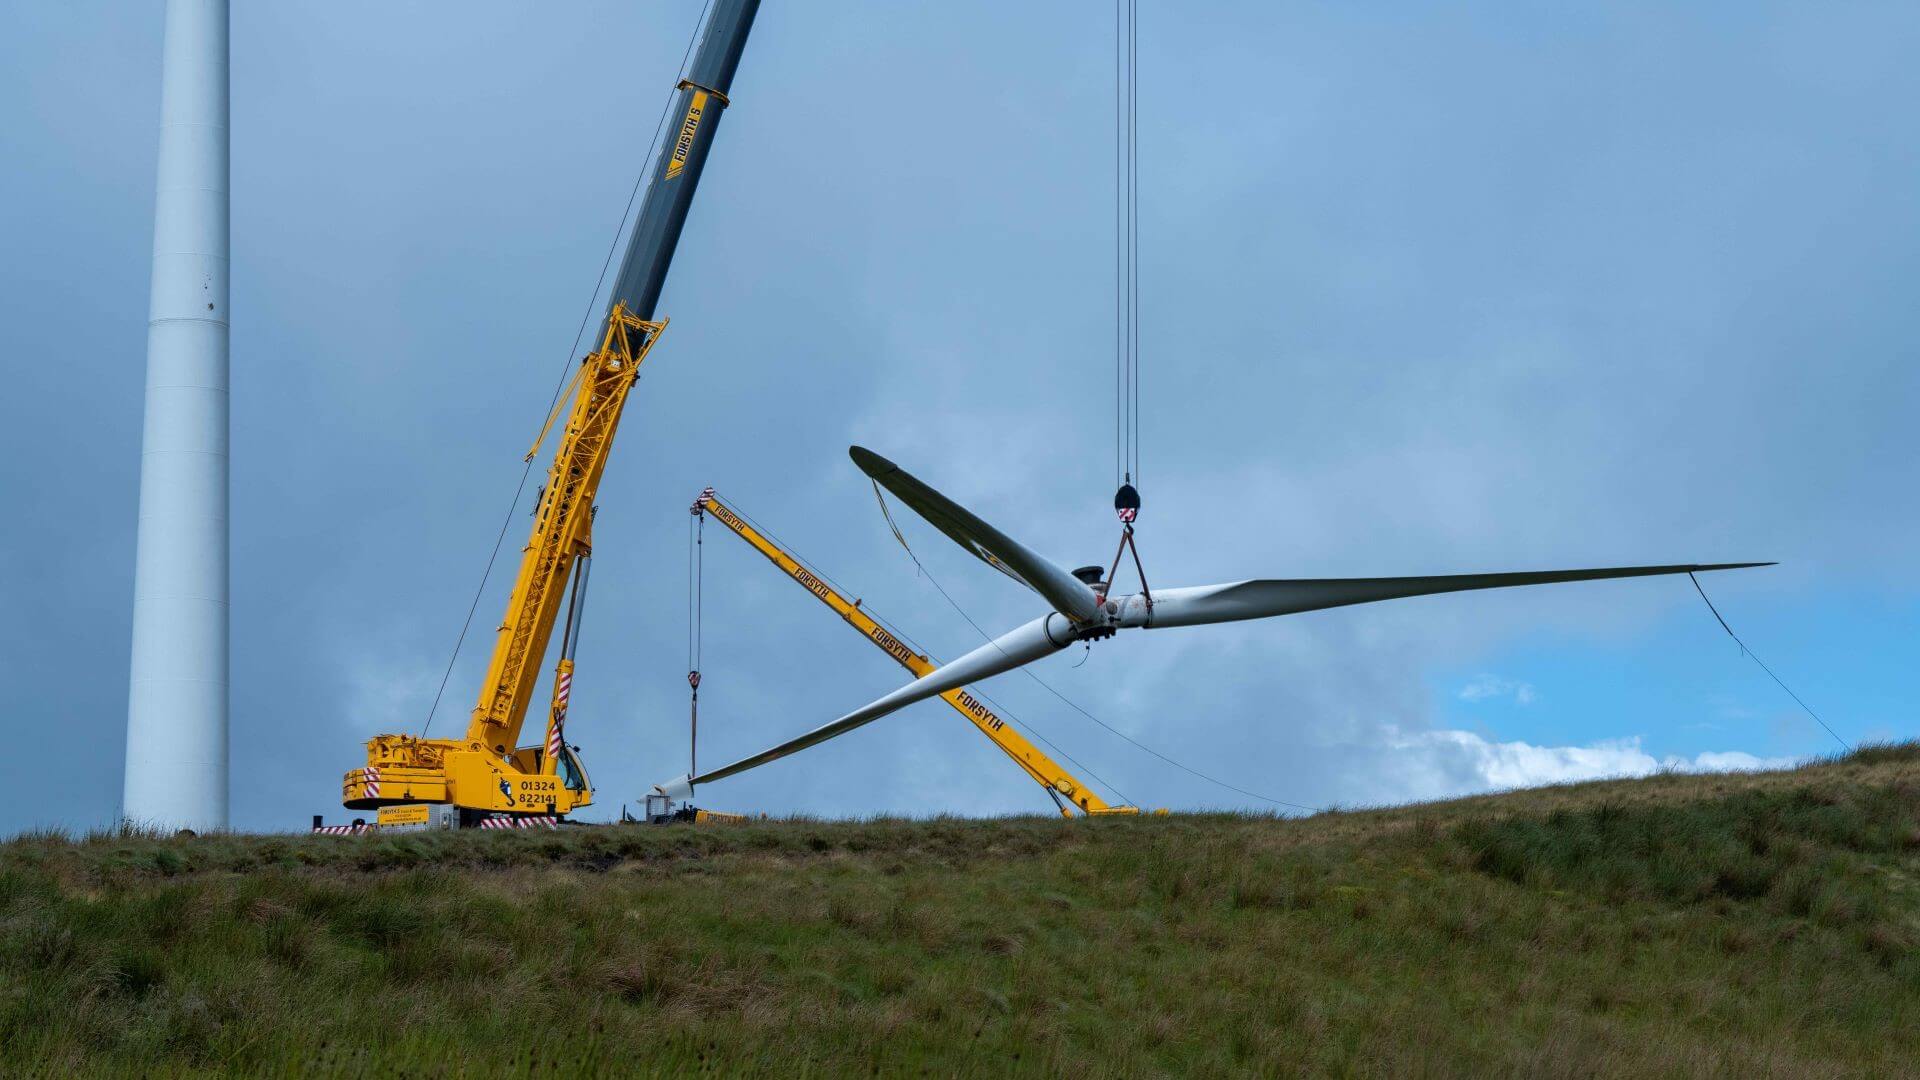 Crane lifting blades down from wind turbine and setting them on the ground